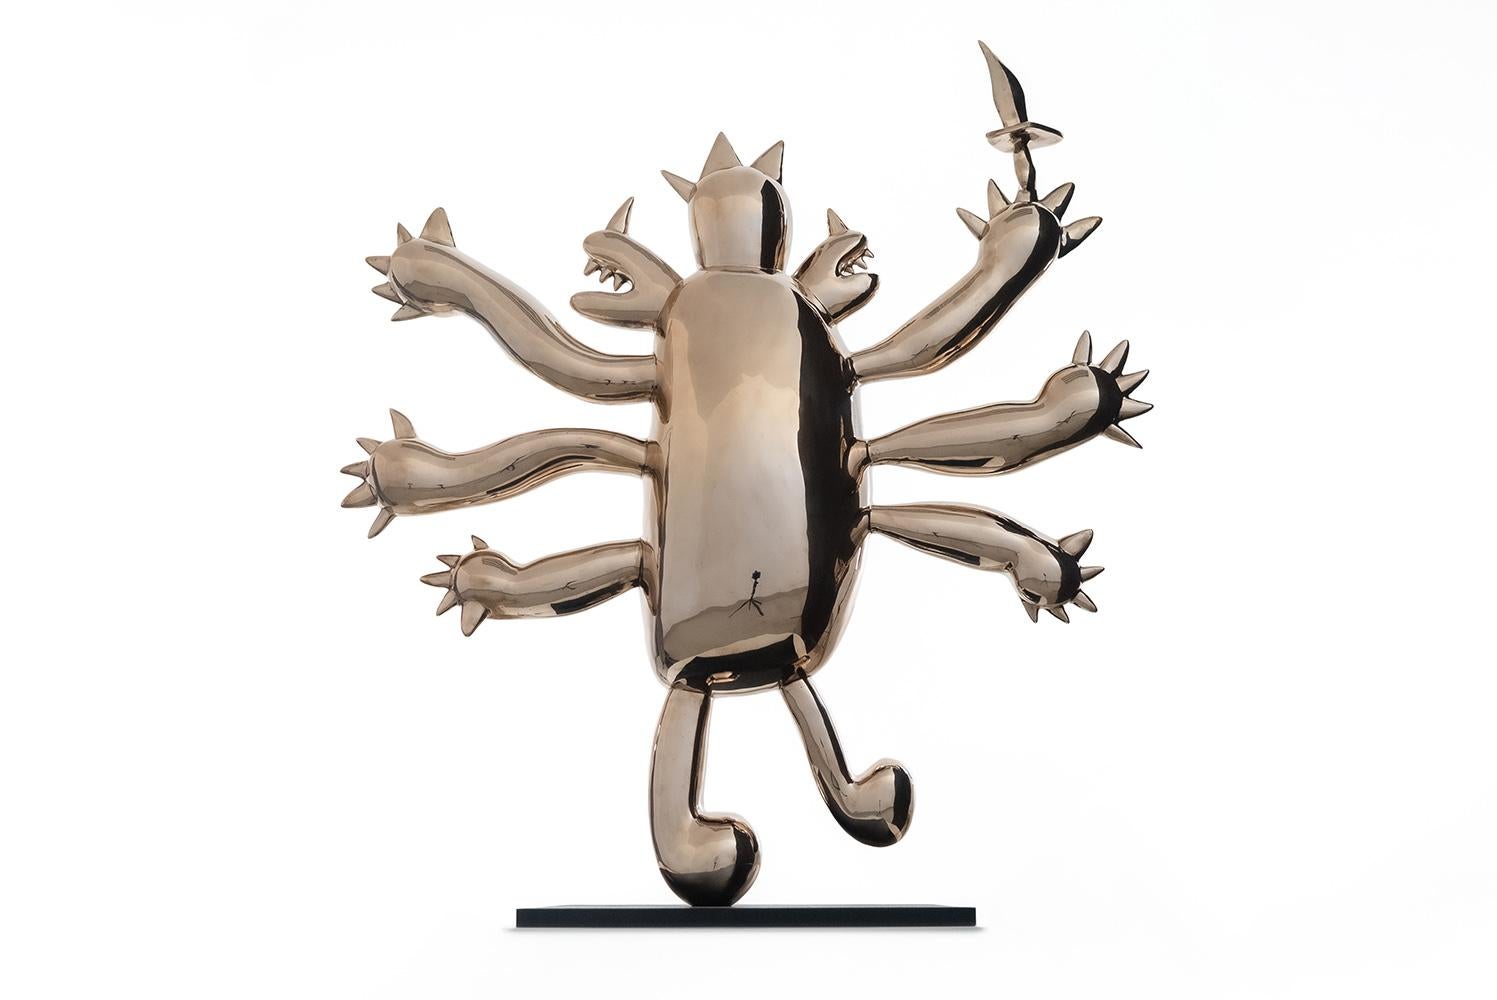 Luzar is a polished bronze sculpture by contemporary artist Marcelo Martin Burgos, dimensions are 100 × 86 × 20 cm (39.4 × 33.9 × 7.9 in). 
The sculpture is signed and numbered, it is part of a limited edition of 12 editions, and comes with a